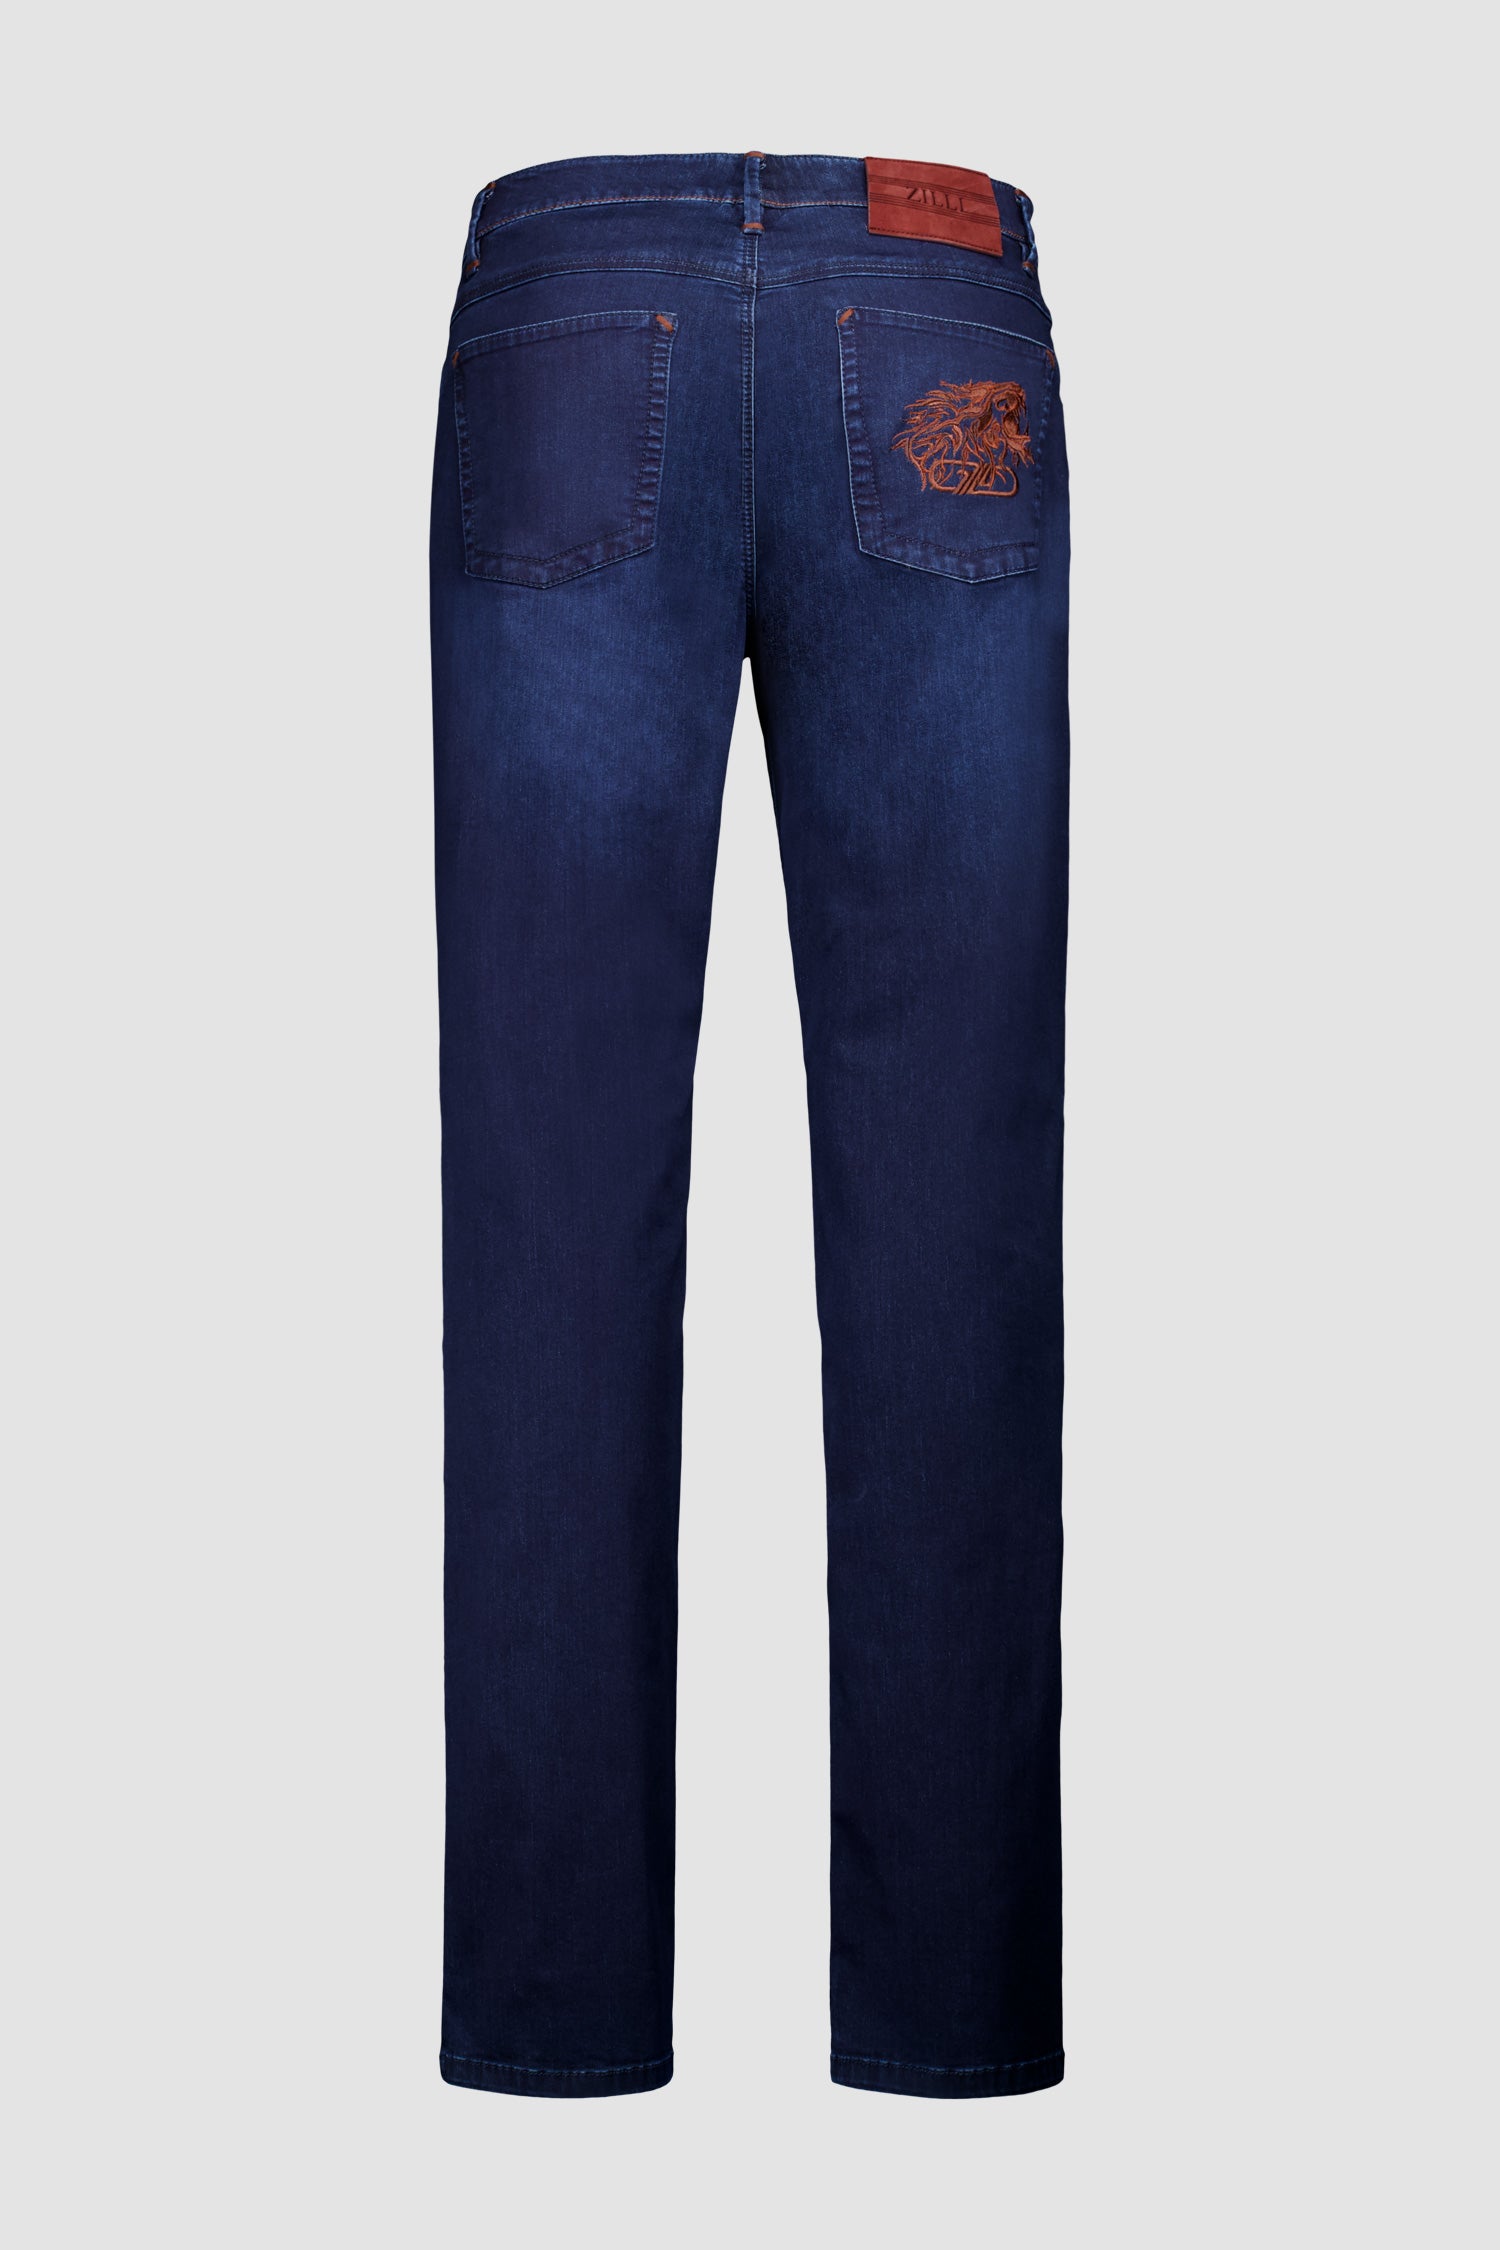 Zilli Slim Fit Jeans with Lion Embroidery